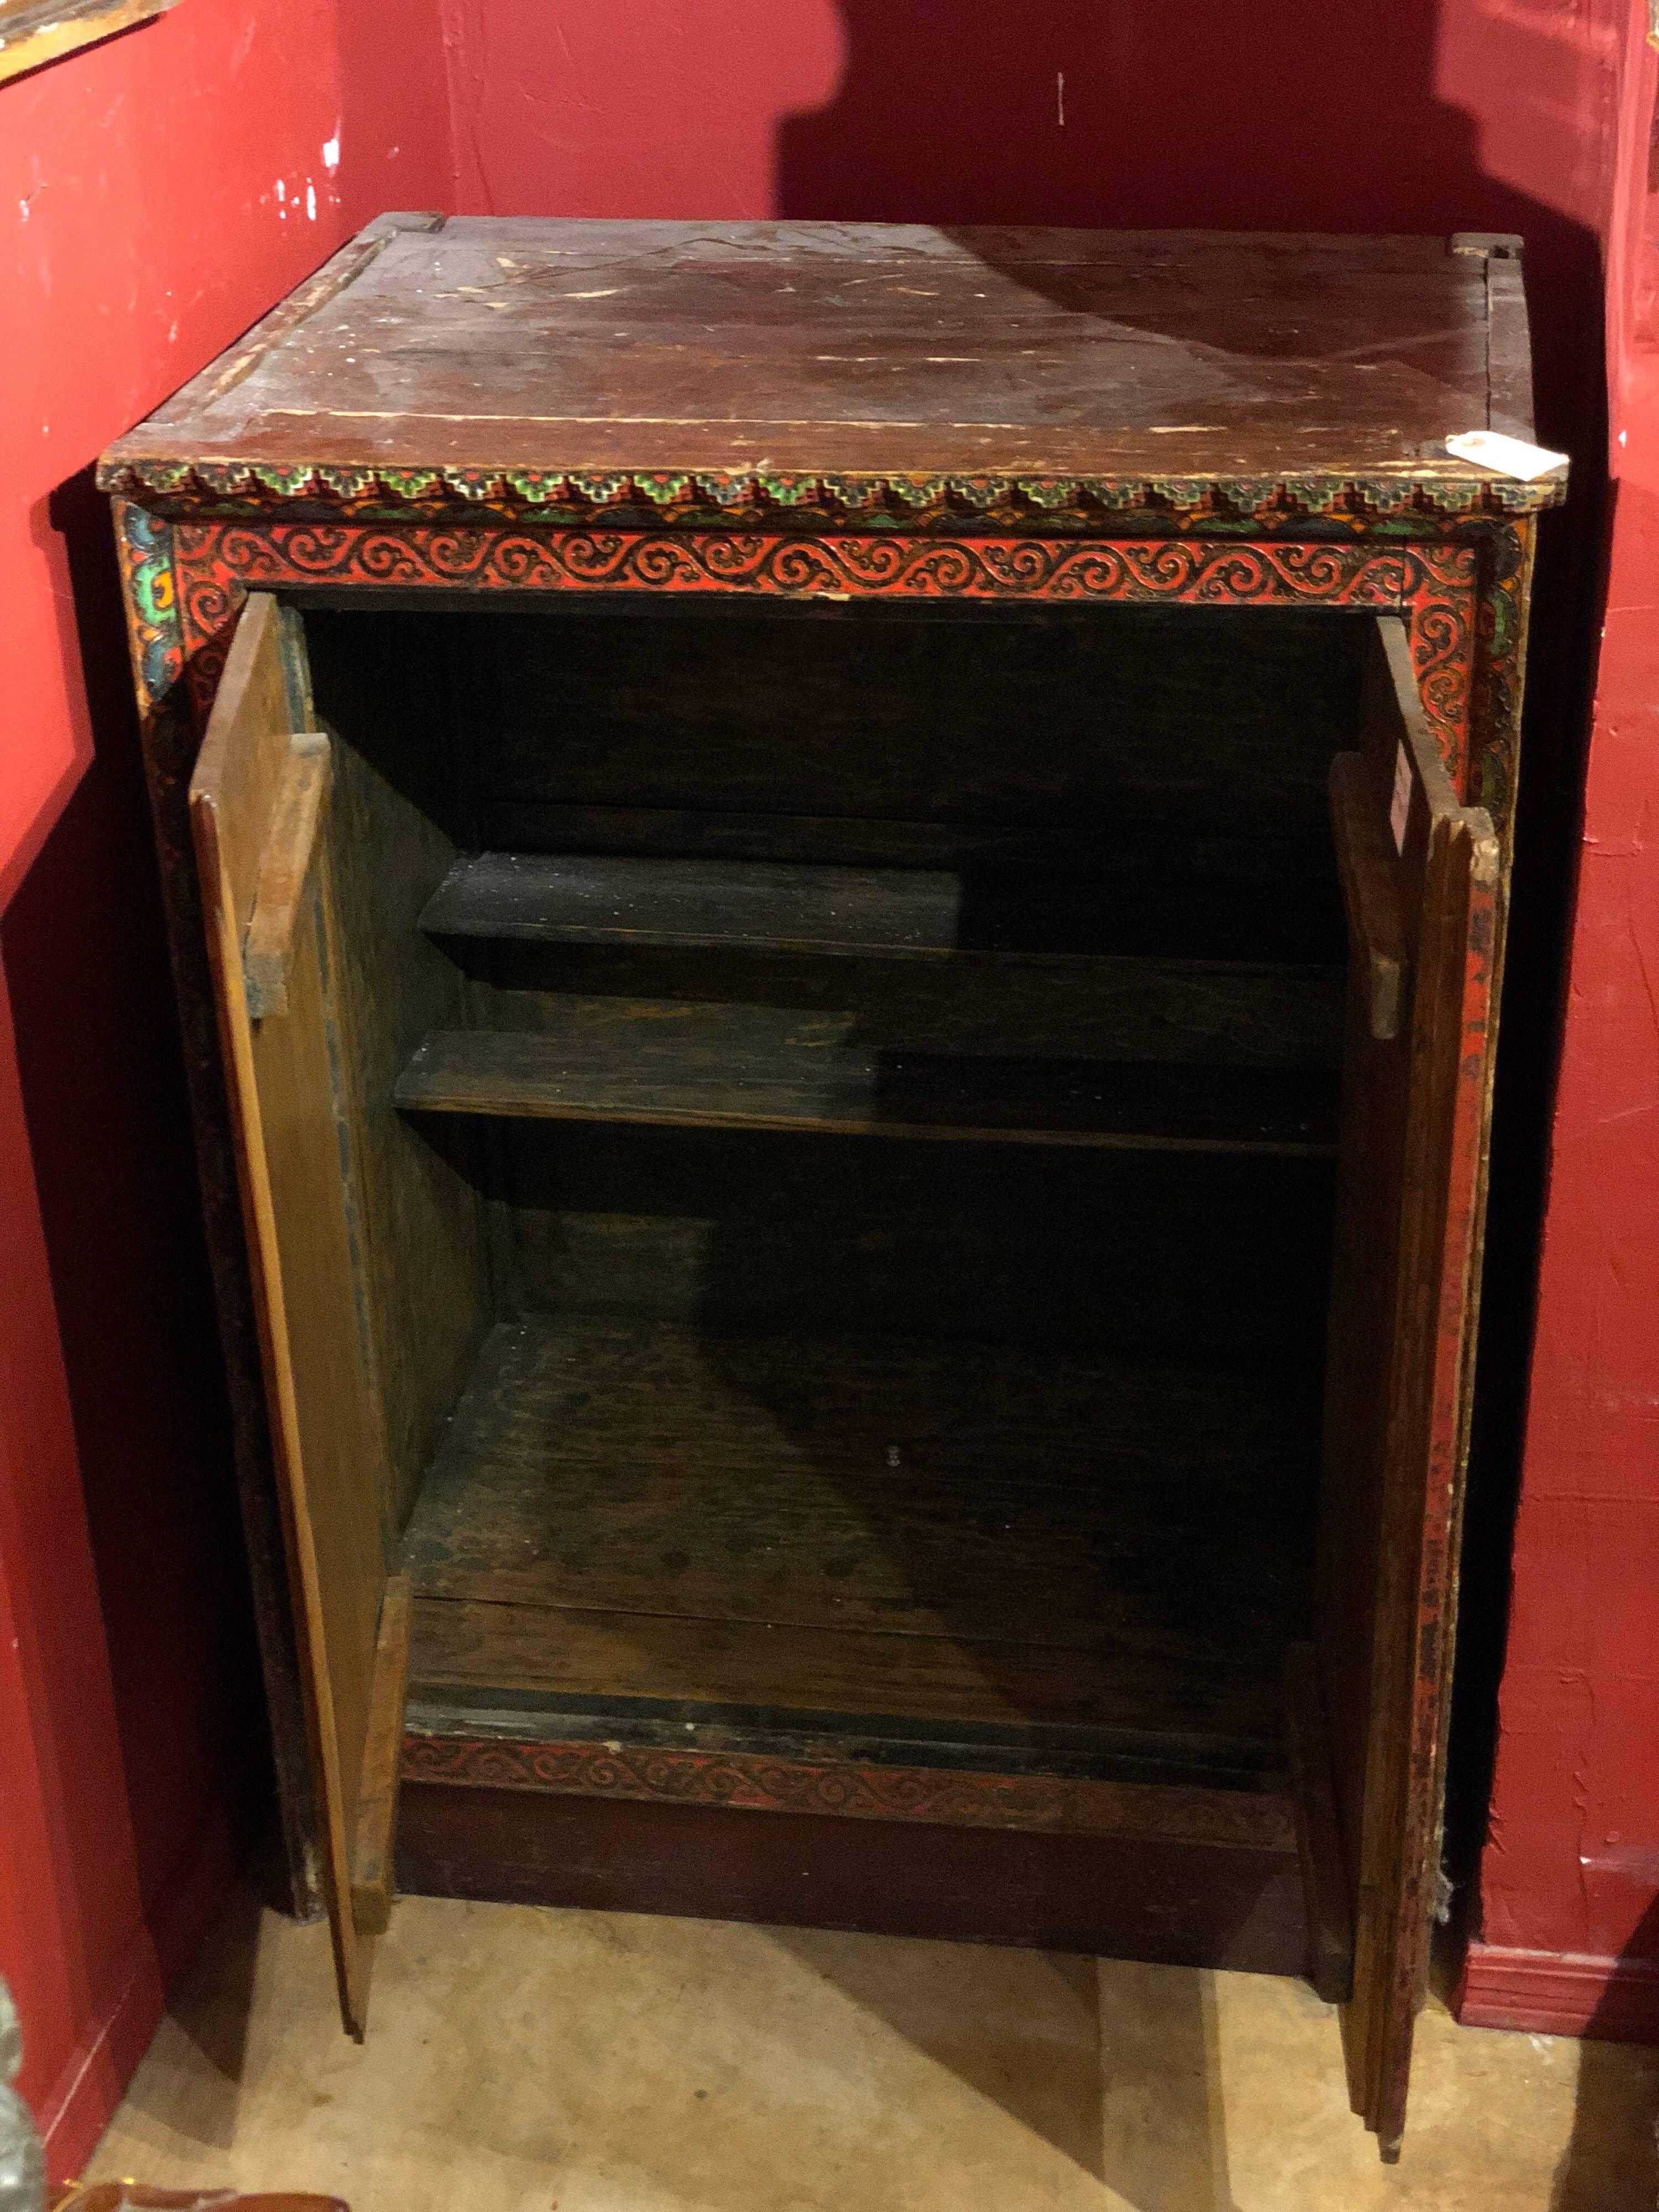 This bright red painted cabinet is from Tibet, circa 19th century.
It comes with a “Certificate of Authenticity”.
It has one internal shelf.
Door work properly and stay closed.
We have a group of Tibetan chests that are all sold individually on